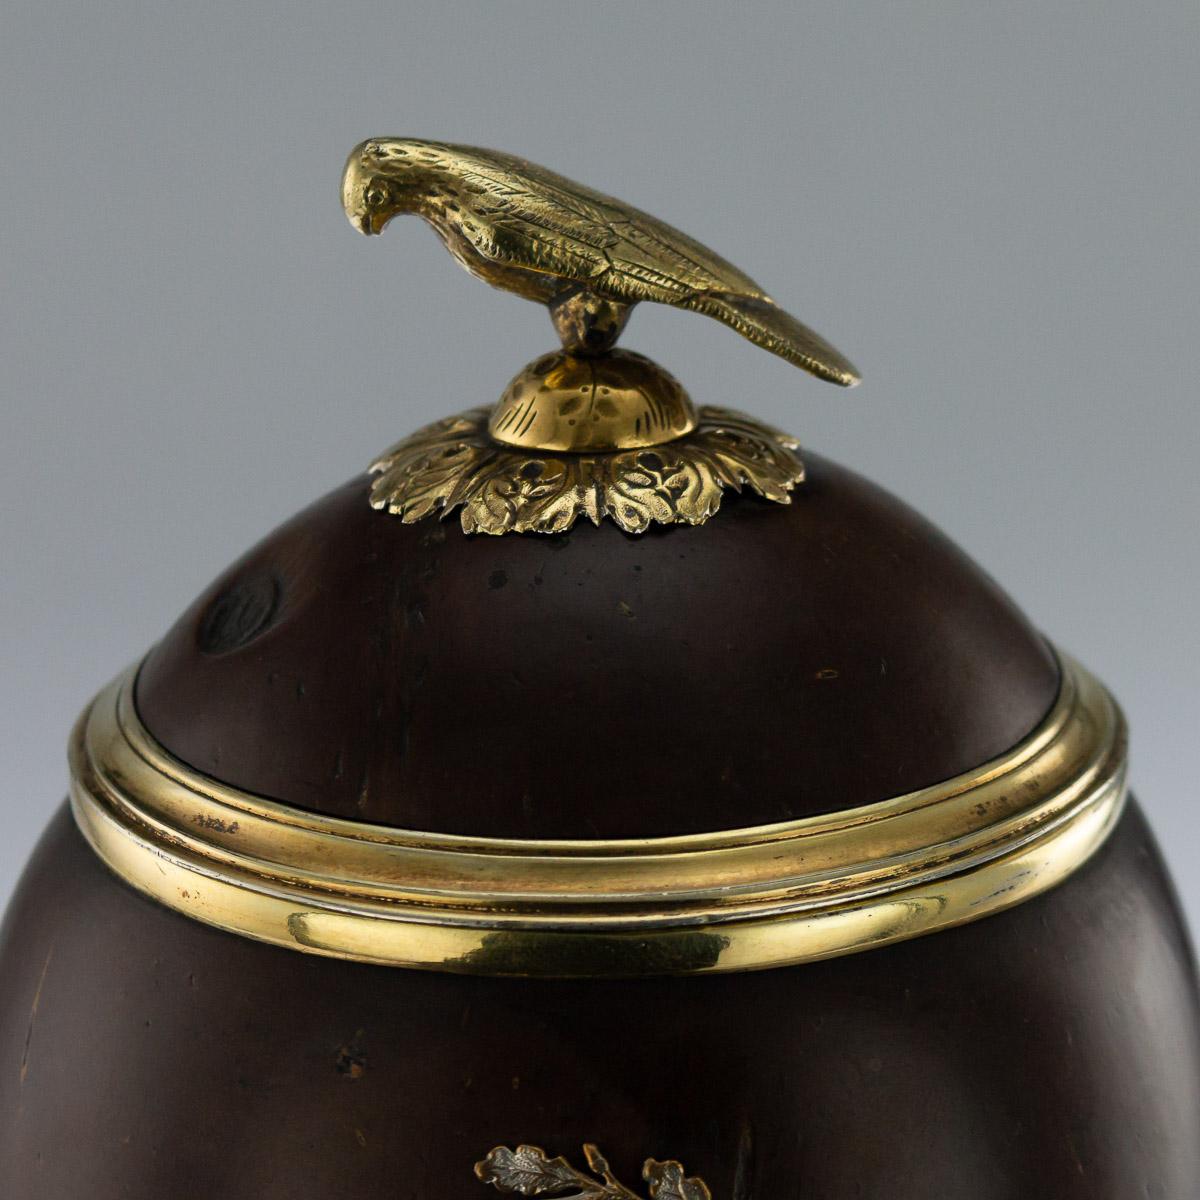 Antique Russian Silver-Gilt Mounted Coconut Lidded Cup, Tula, circa 1825 4